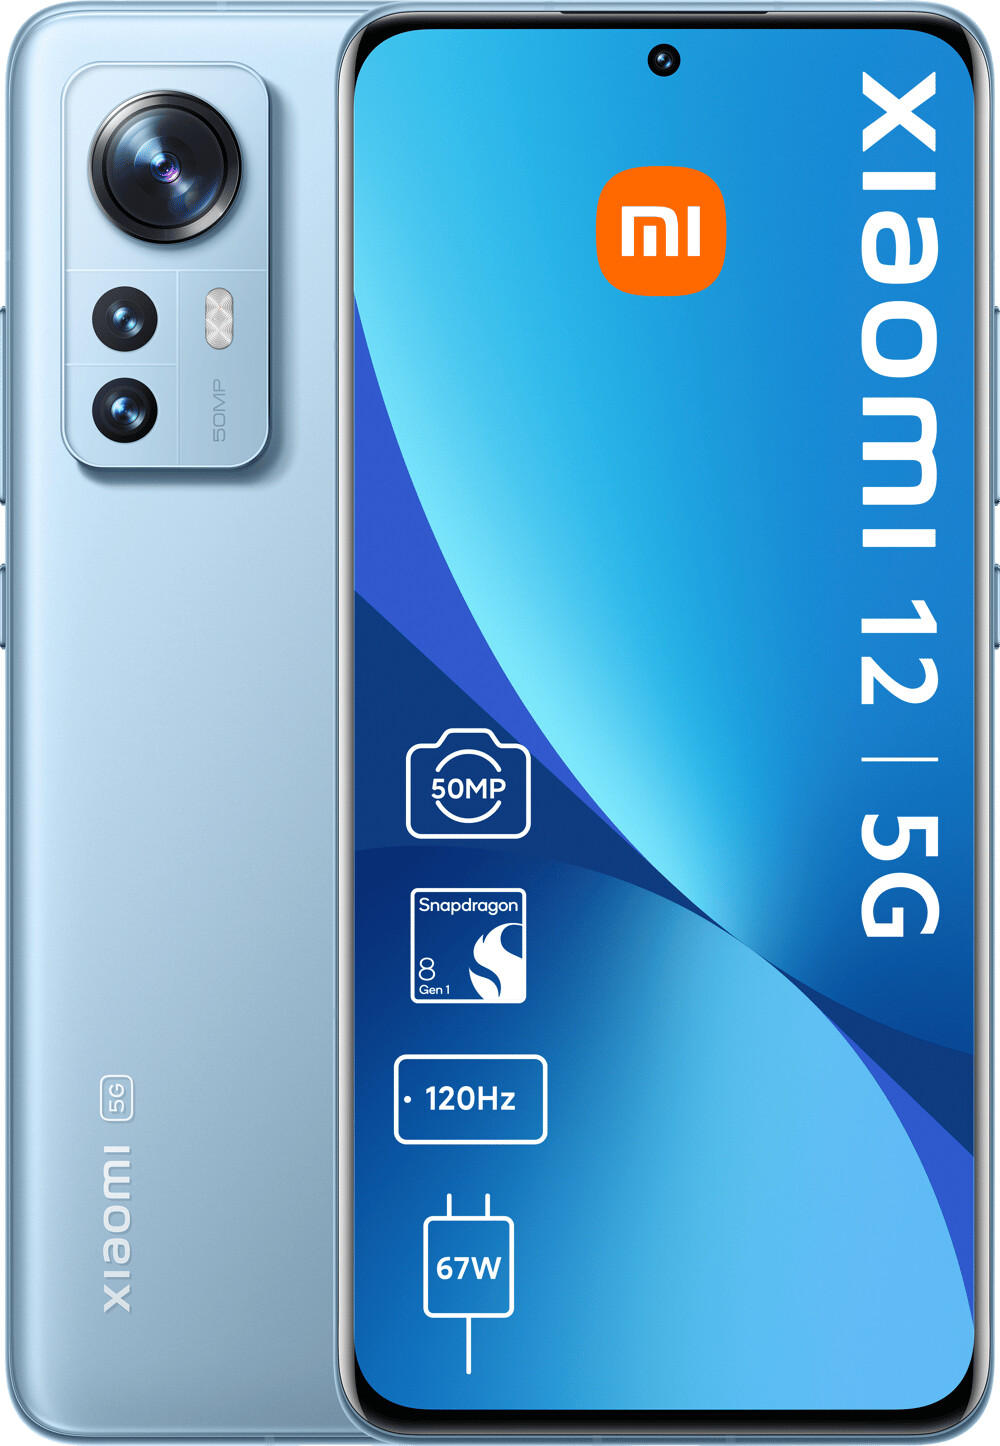 Buy Xiaomi 12 256GB Blue from £359.14 (Today) – Best Deals on 